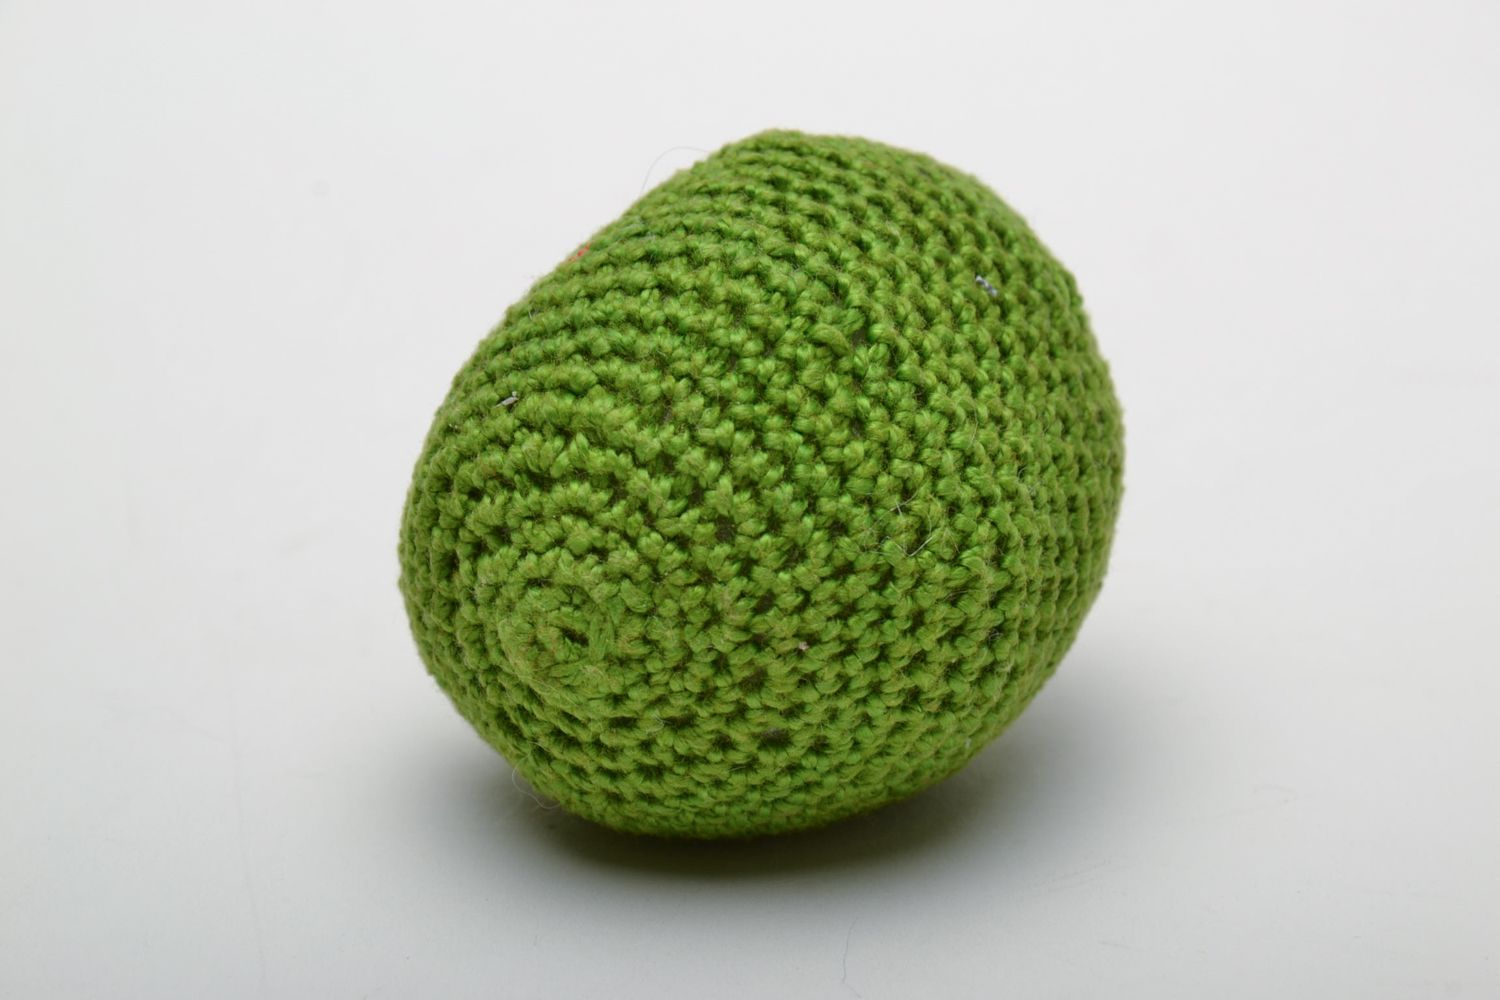 Crochet toy lime made of natural materials photo 2